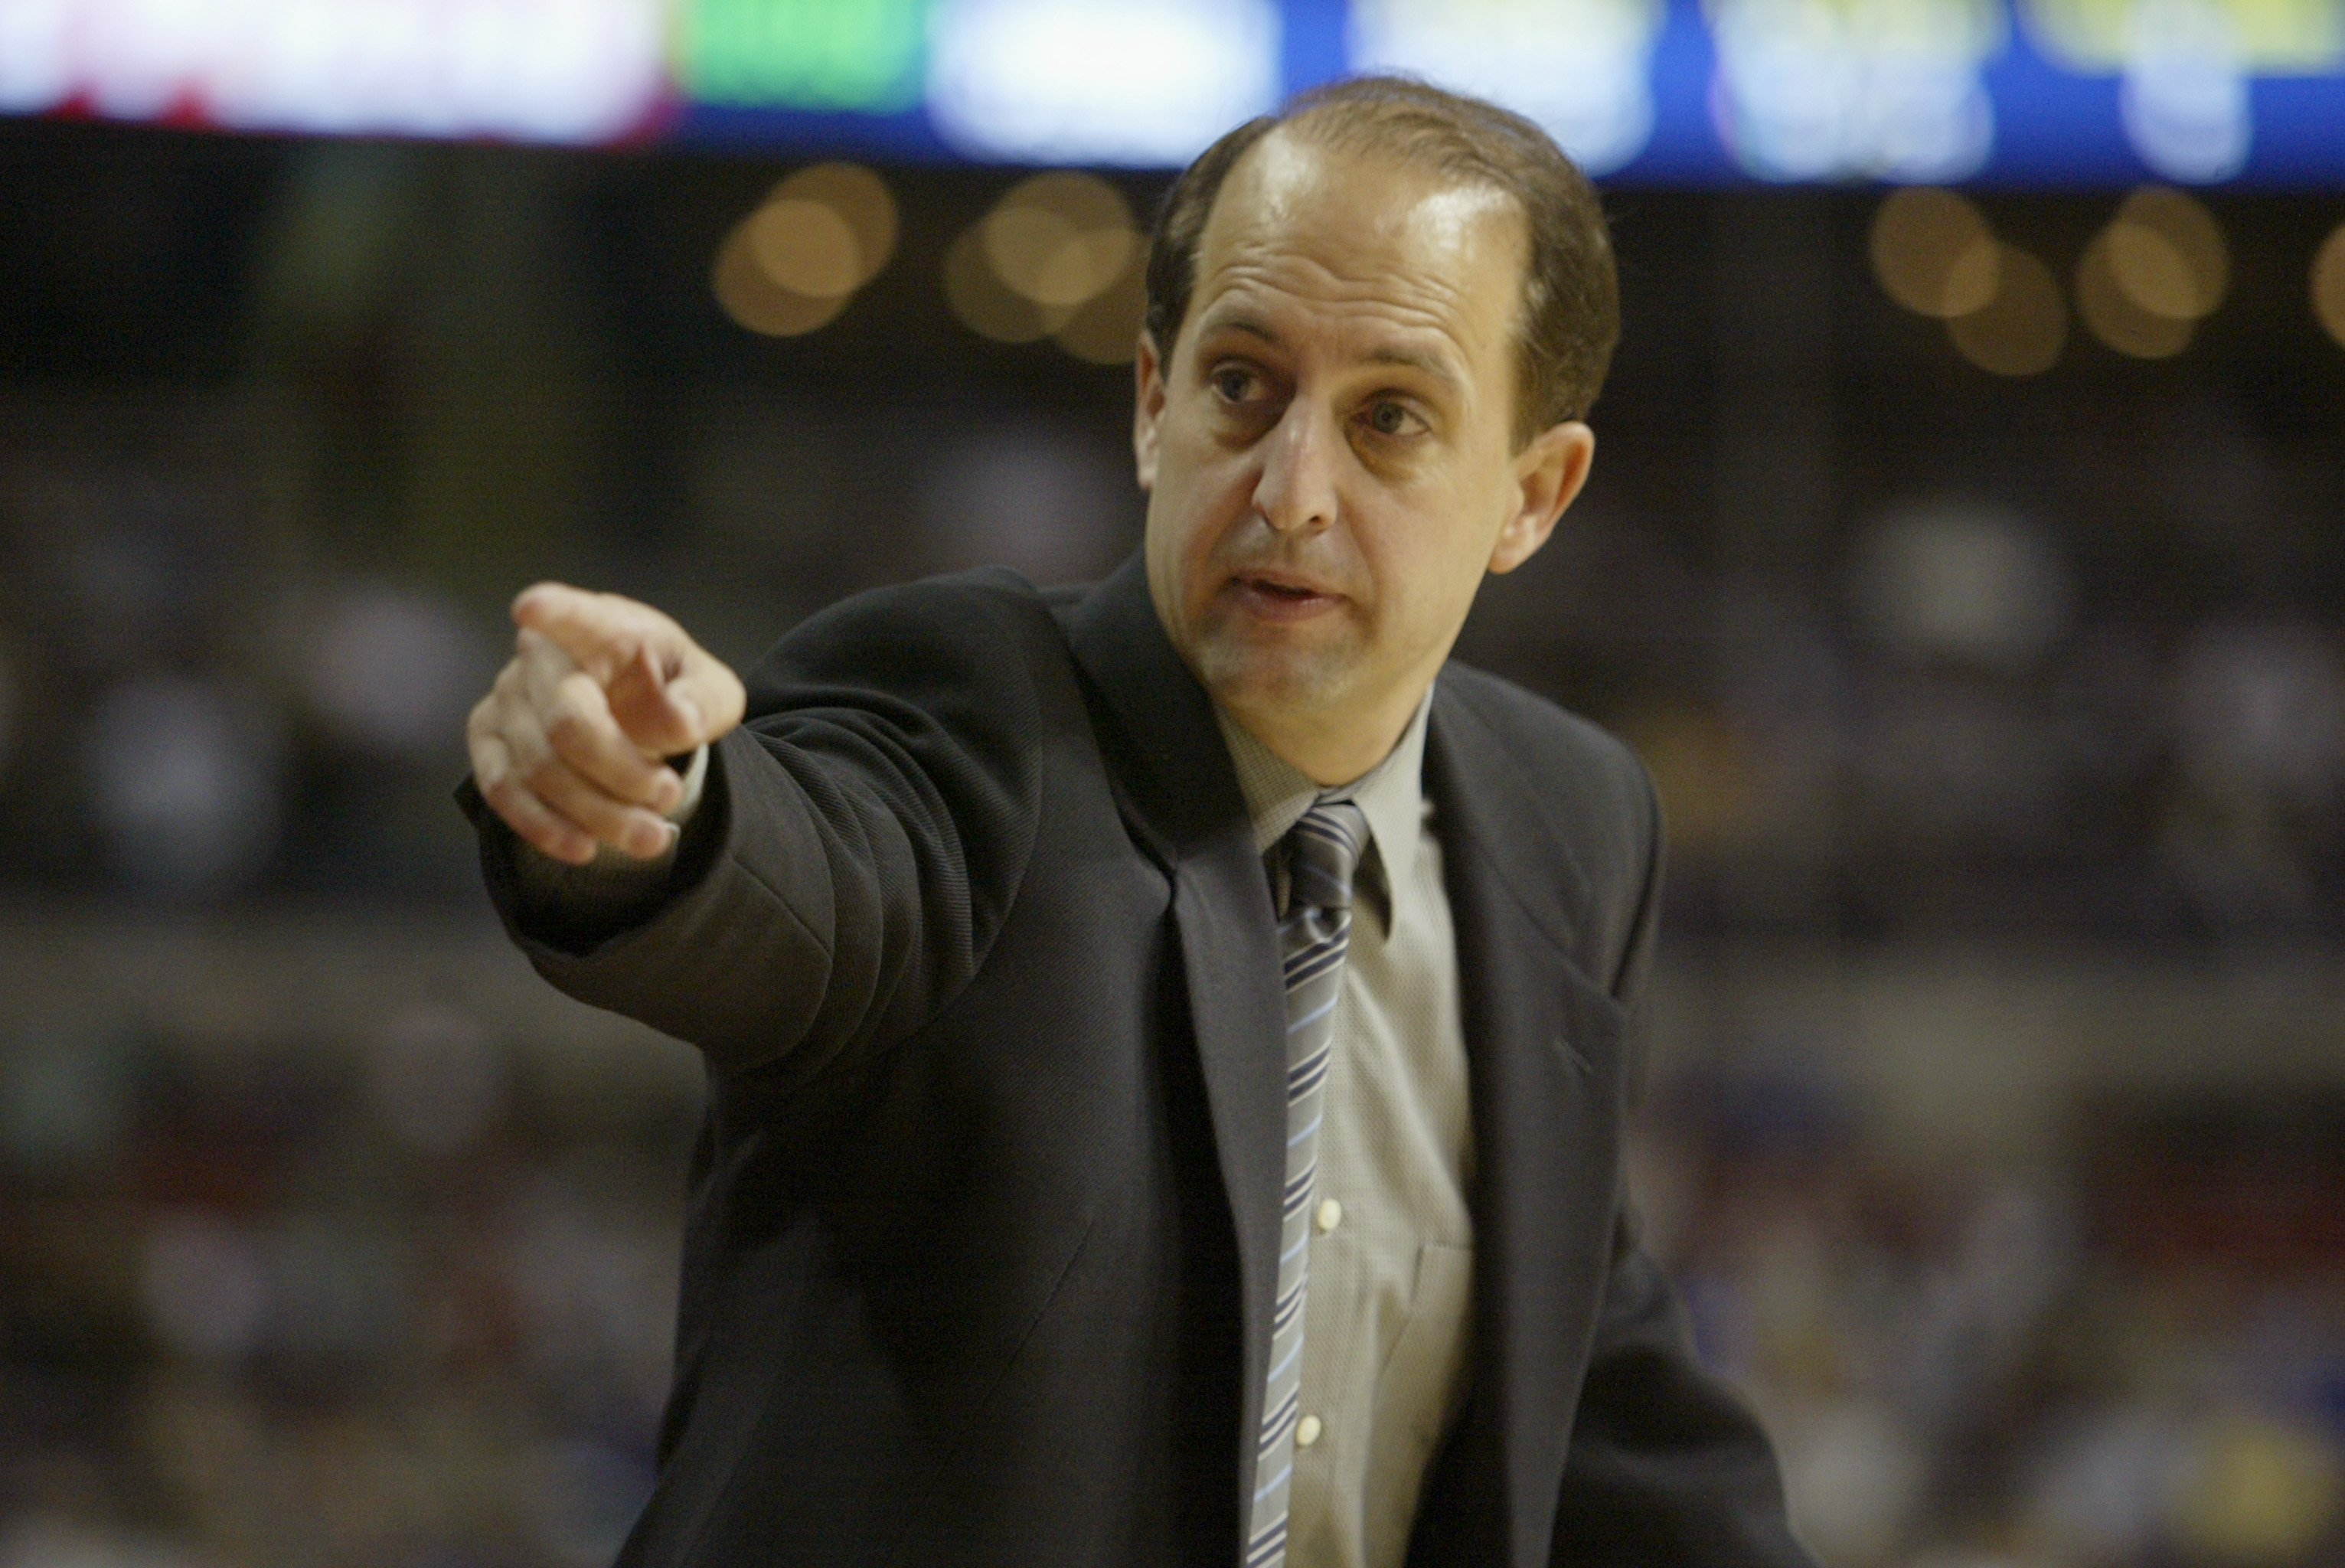 AUBURN HILLS, MI - NOVEMBER 2:  Head coach Jeff Van Gundy of the Houston Rockets points during the game against the Detroit Pistons at The Palace of Auburn Hills on November 2, 2004 in Auburn Hills, Michigan.  The Pistons won 87-79.  NOTE TO USER: User ex